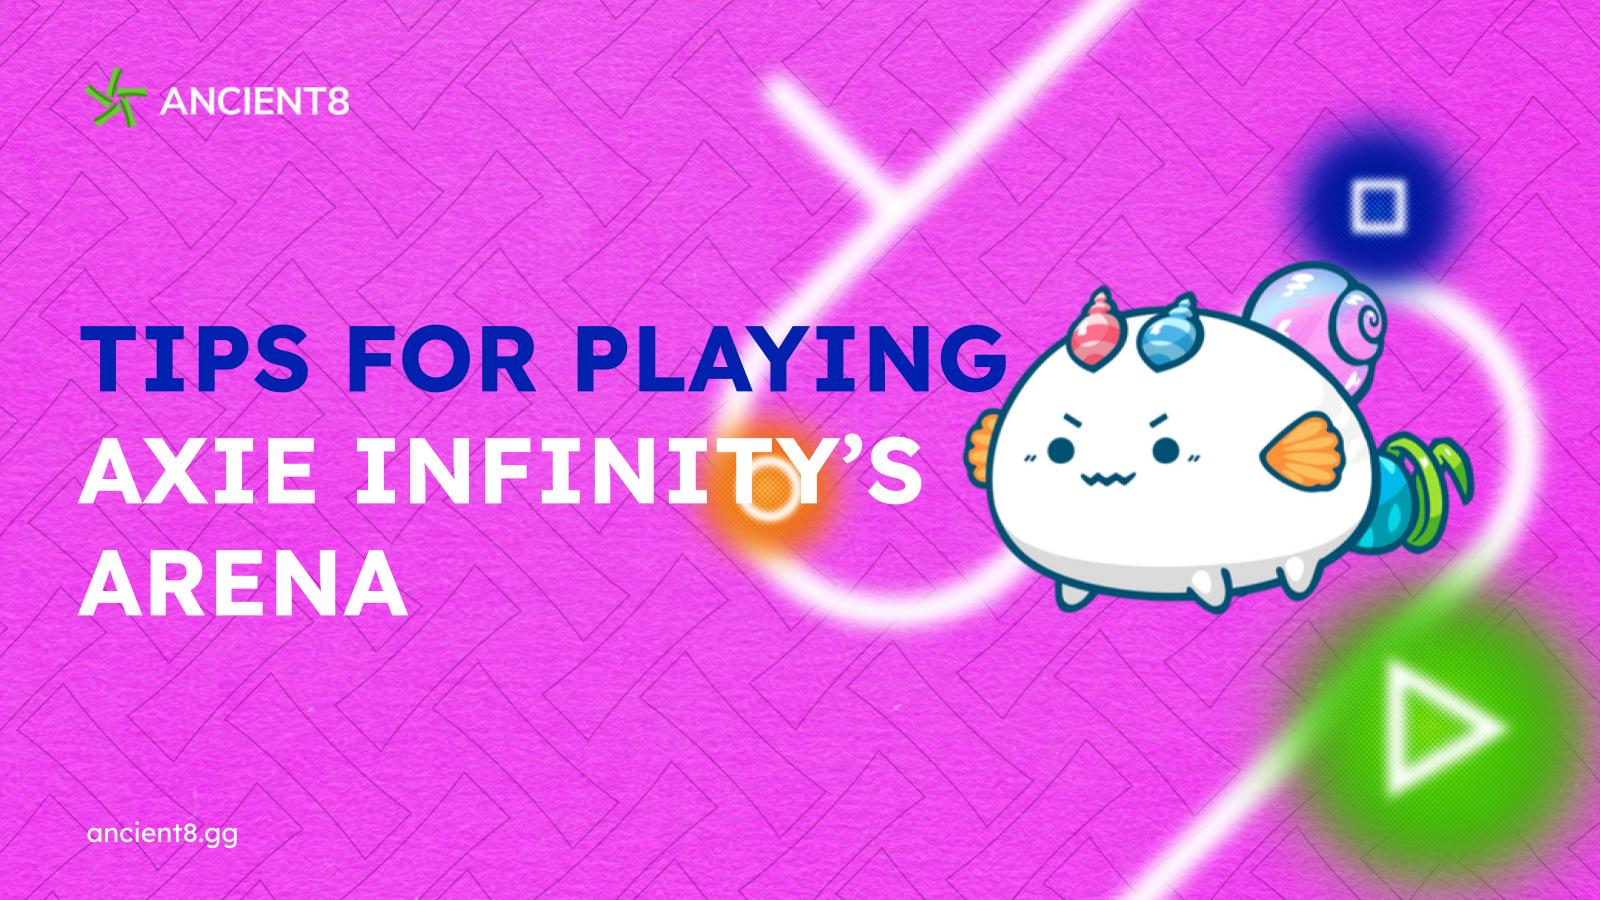 Tips for playing Axie Infinity’s Arena